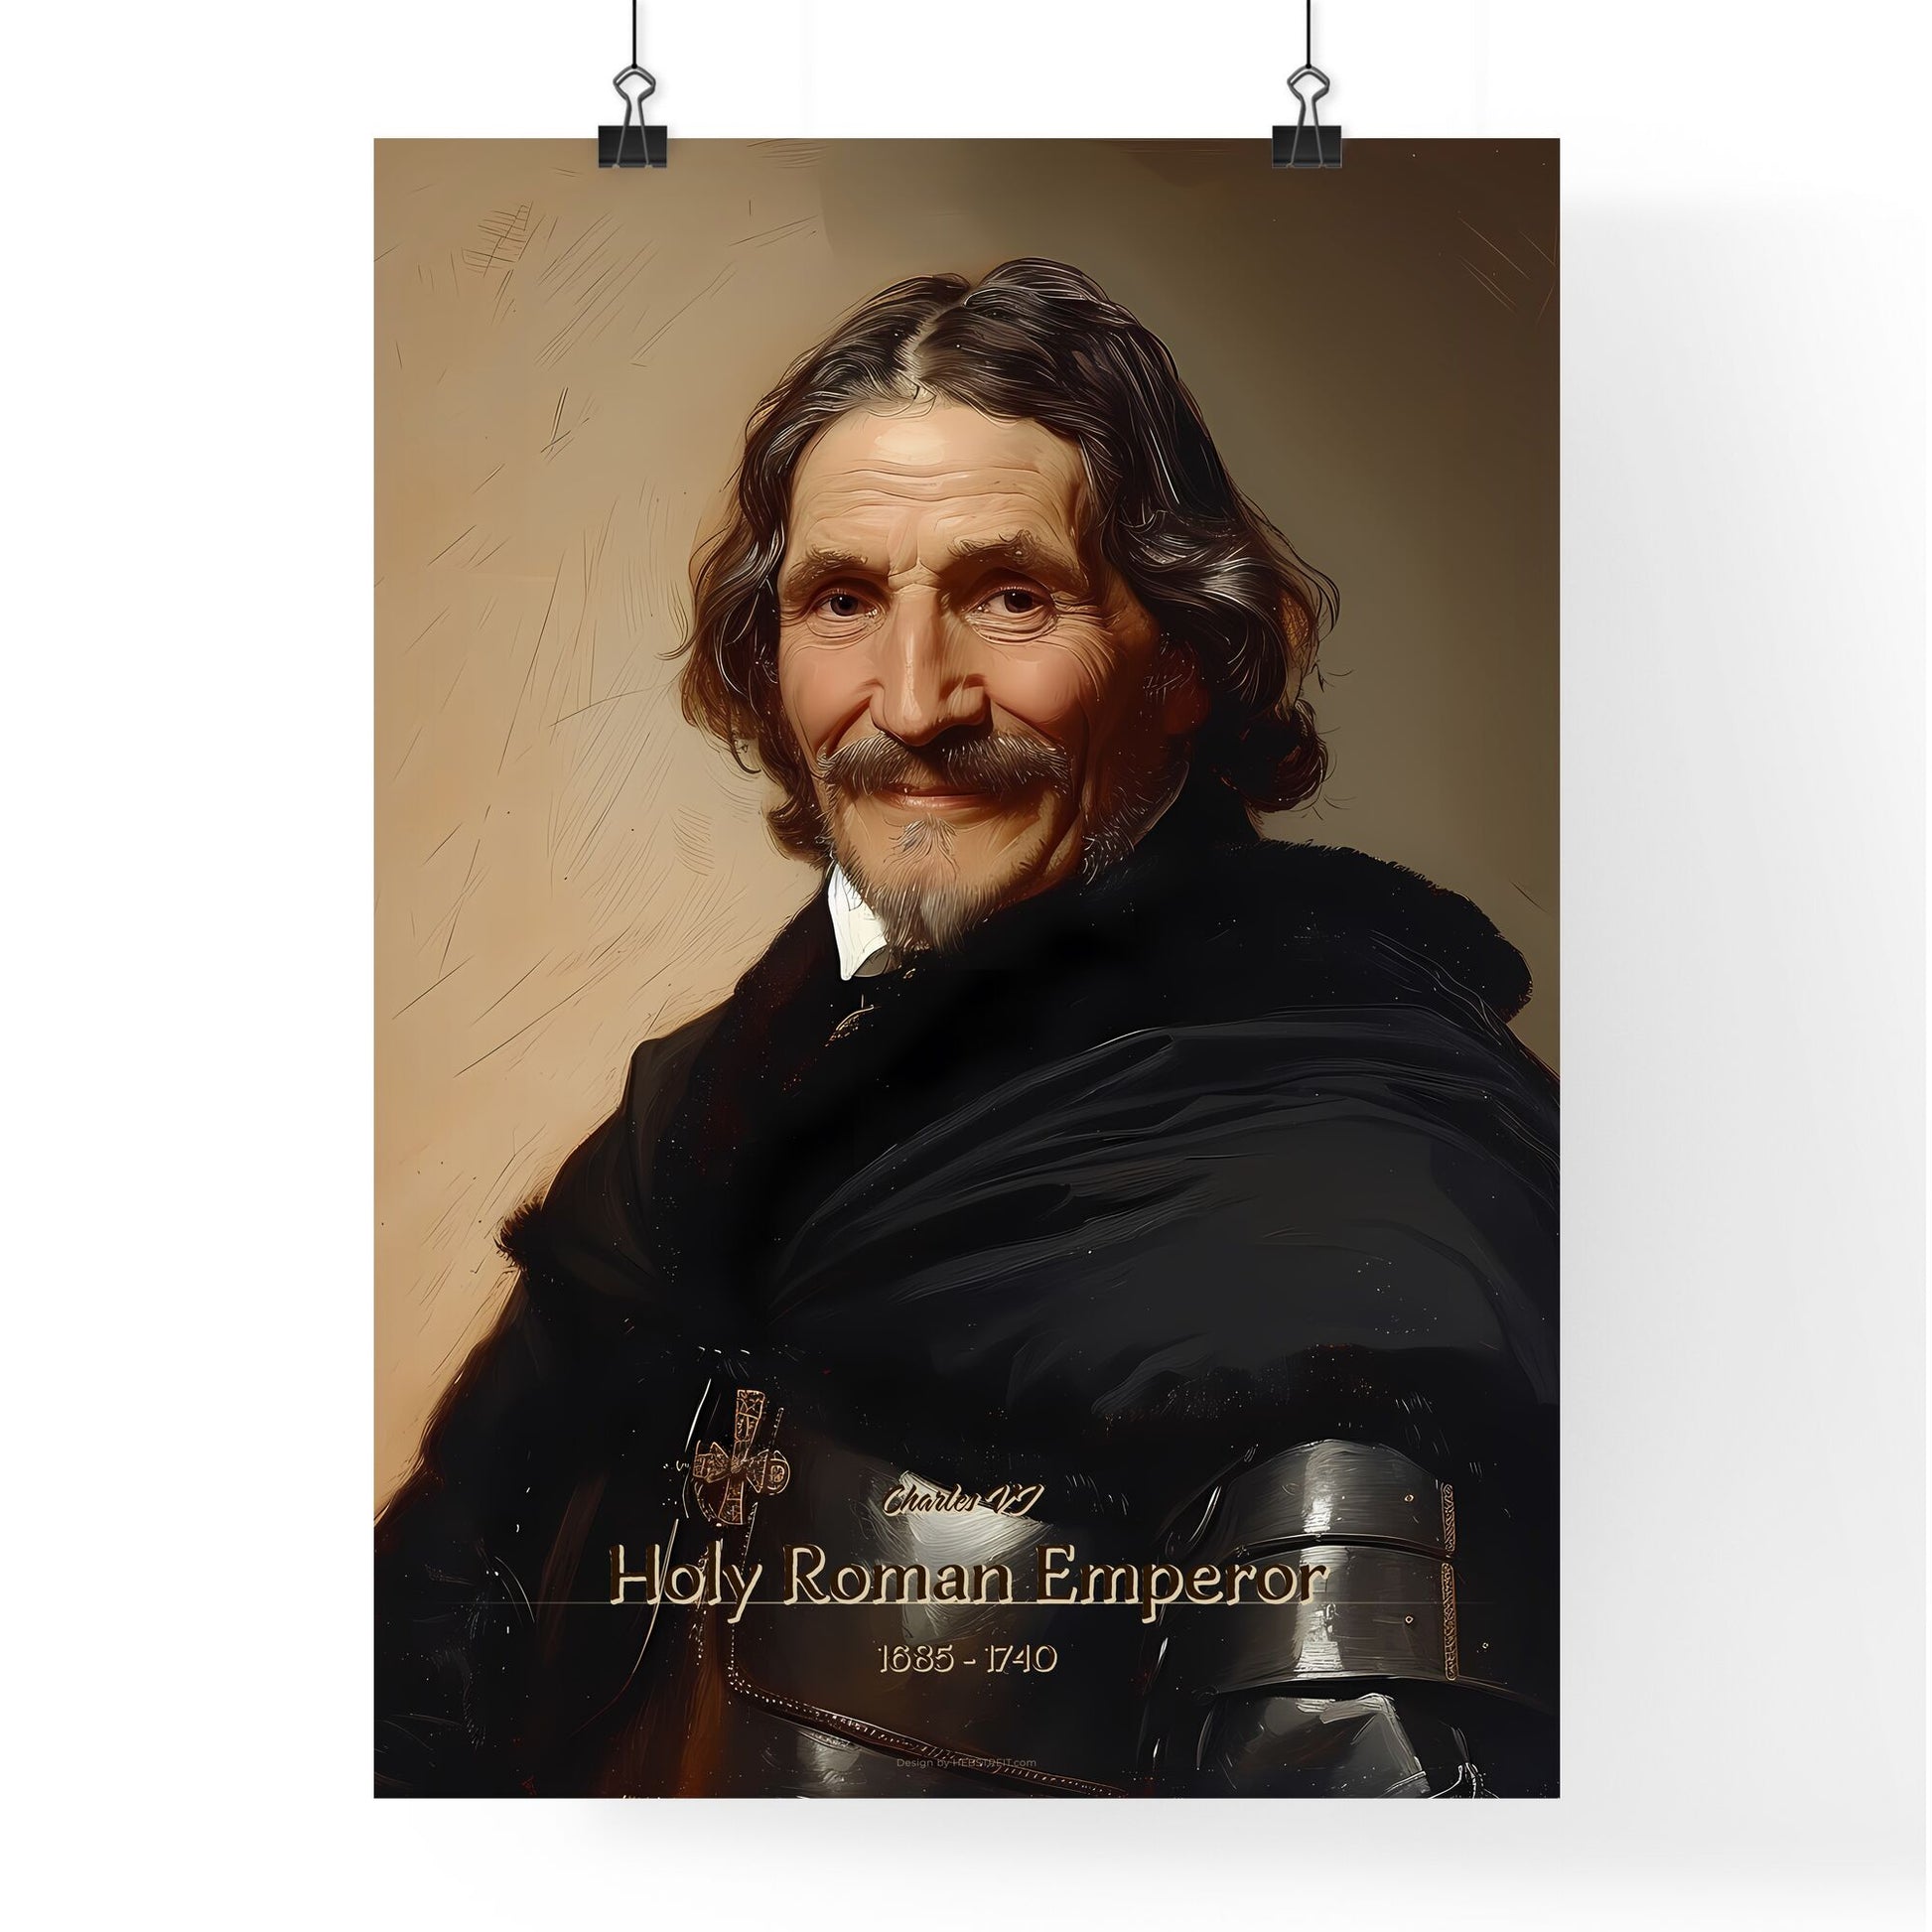 Charles VI, Holy Roman Emperor, 1685 - 1740, A Poster of a man in a black coat Default Title